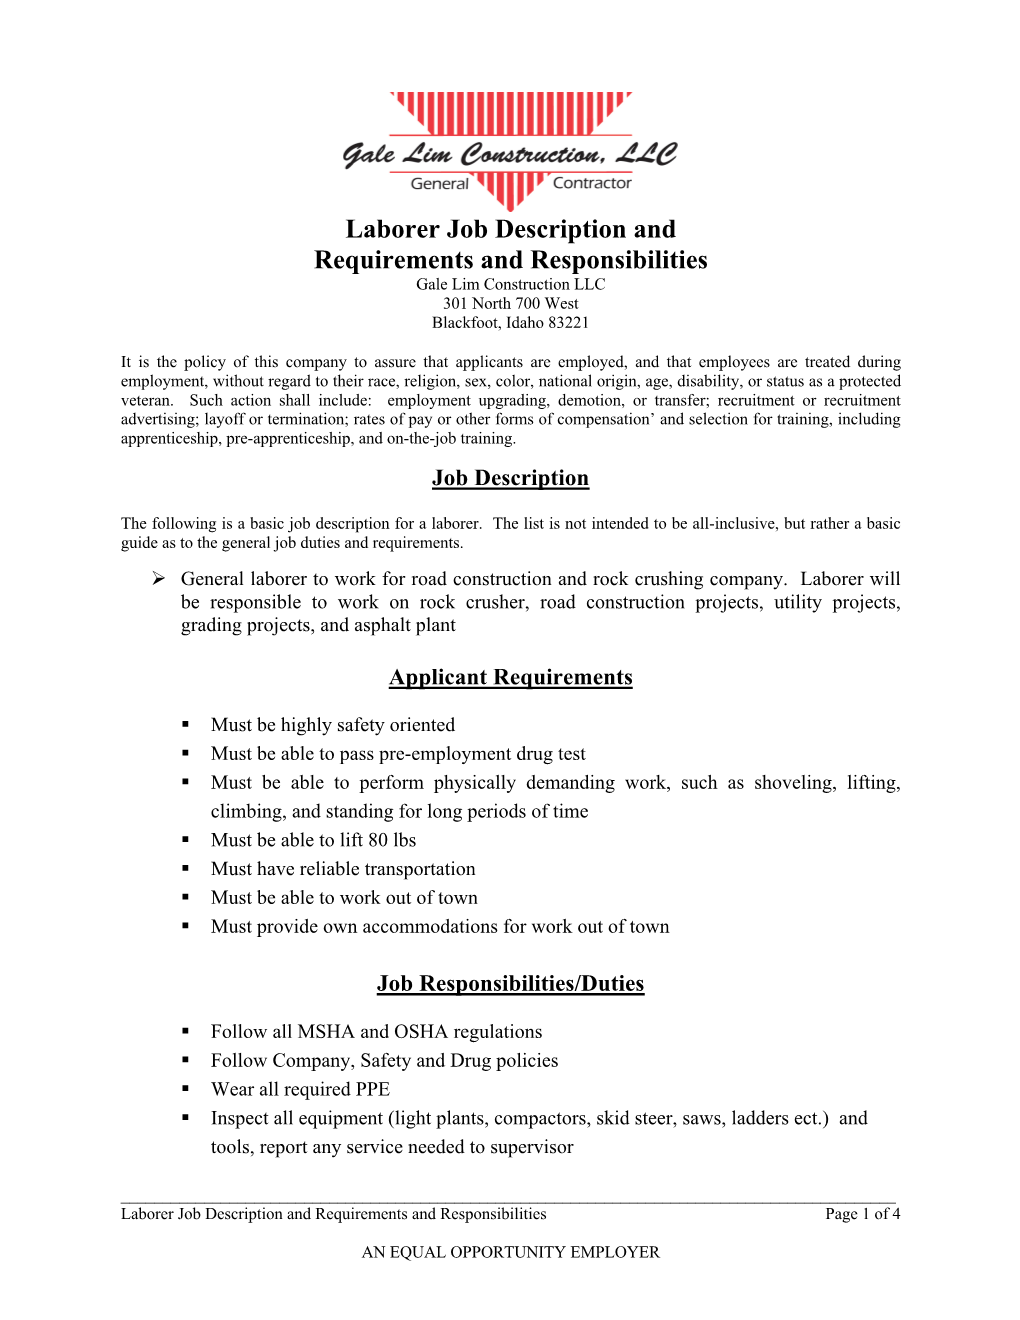 Laborer Job Description and Requirements and Responsibilities Gale Lim Construction LLC 301 North 700 West Blackfoot, Idaho 83221